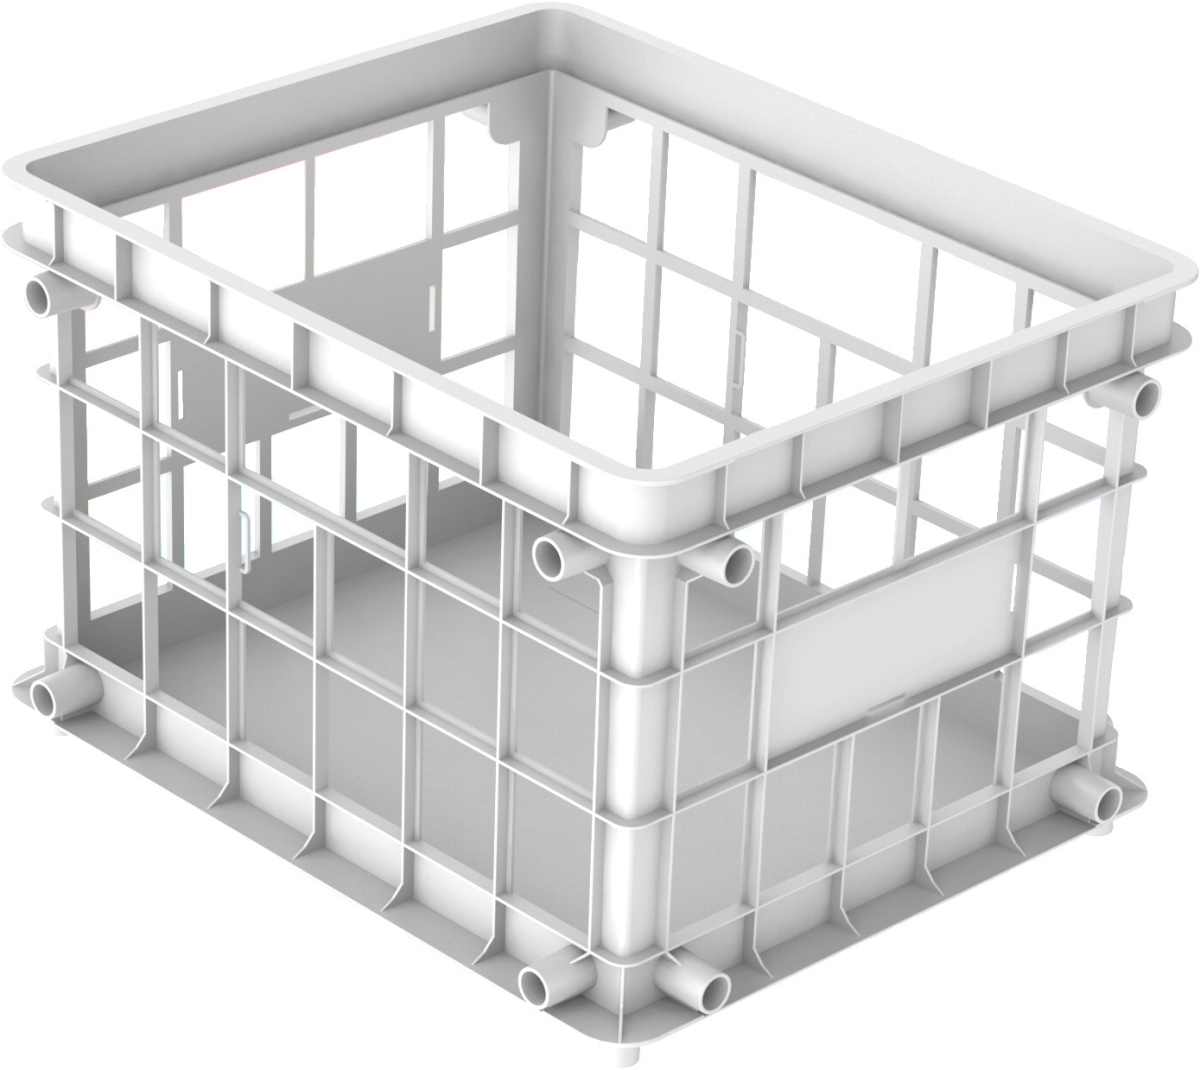 1540634 Standard Crate, Letter-legal - White